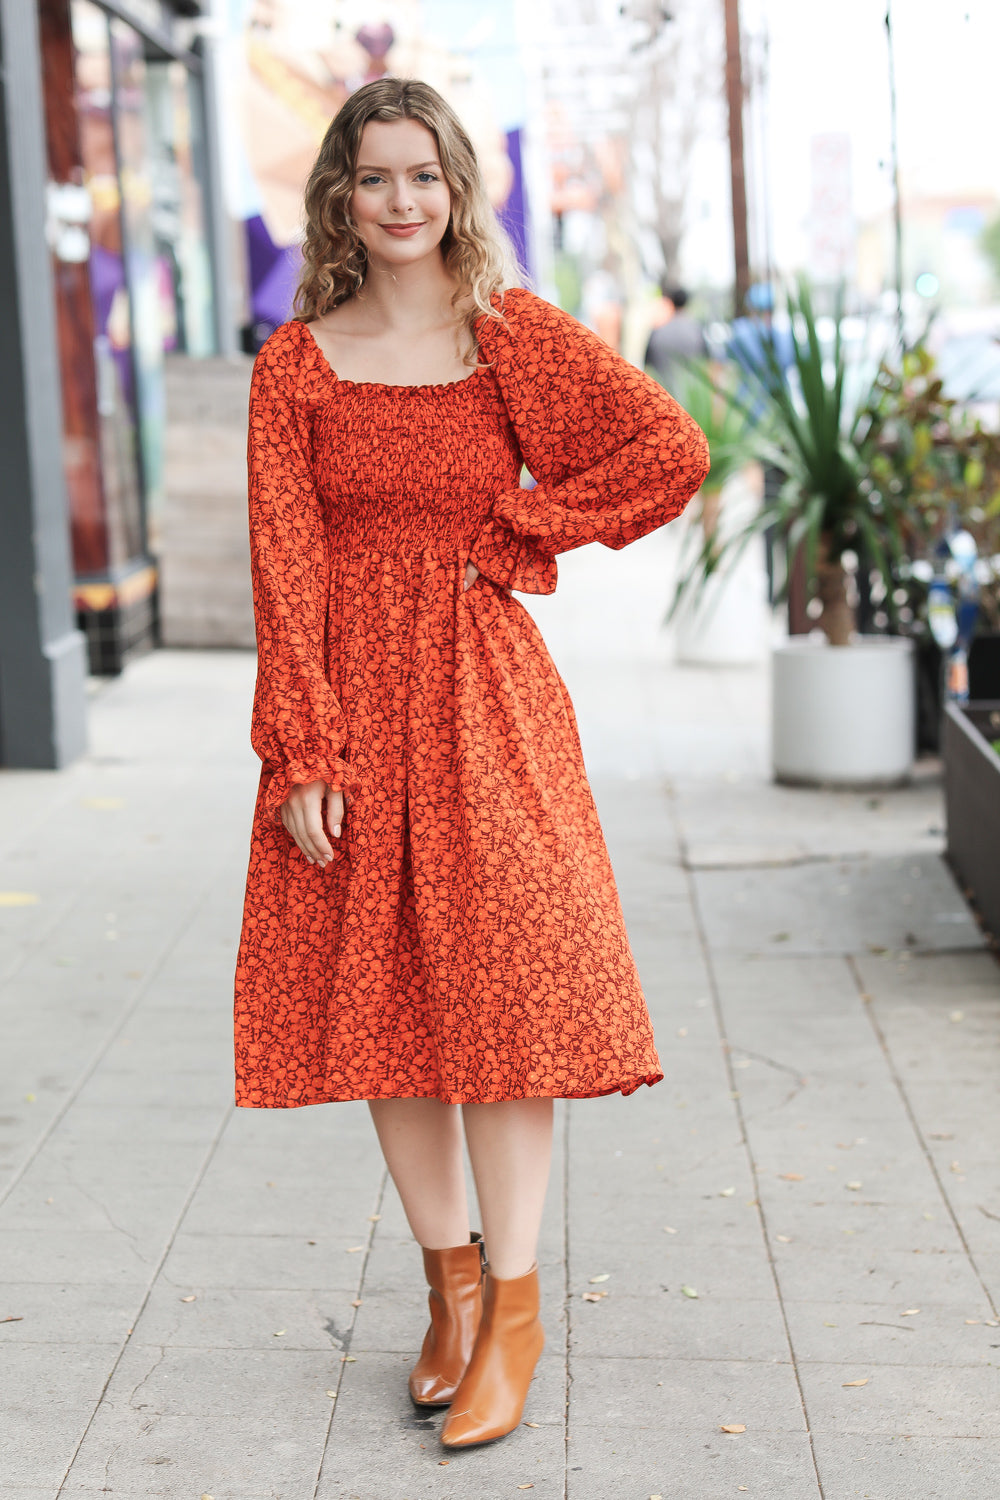 Keep You Close Smocking Ditsy Floral Woven Dress in Rust